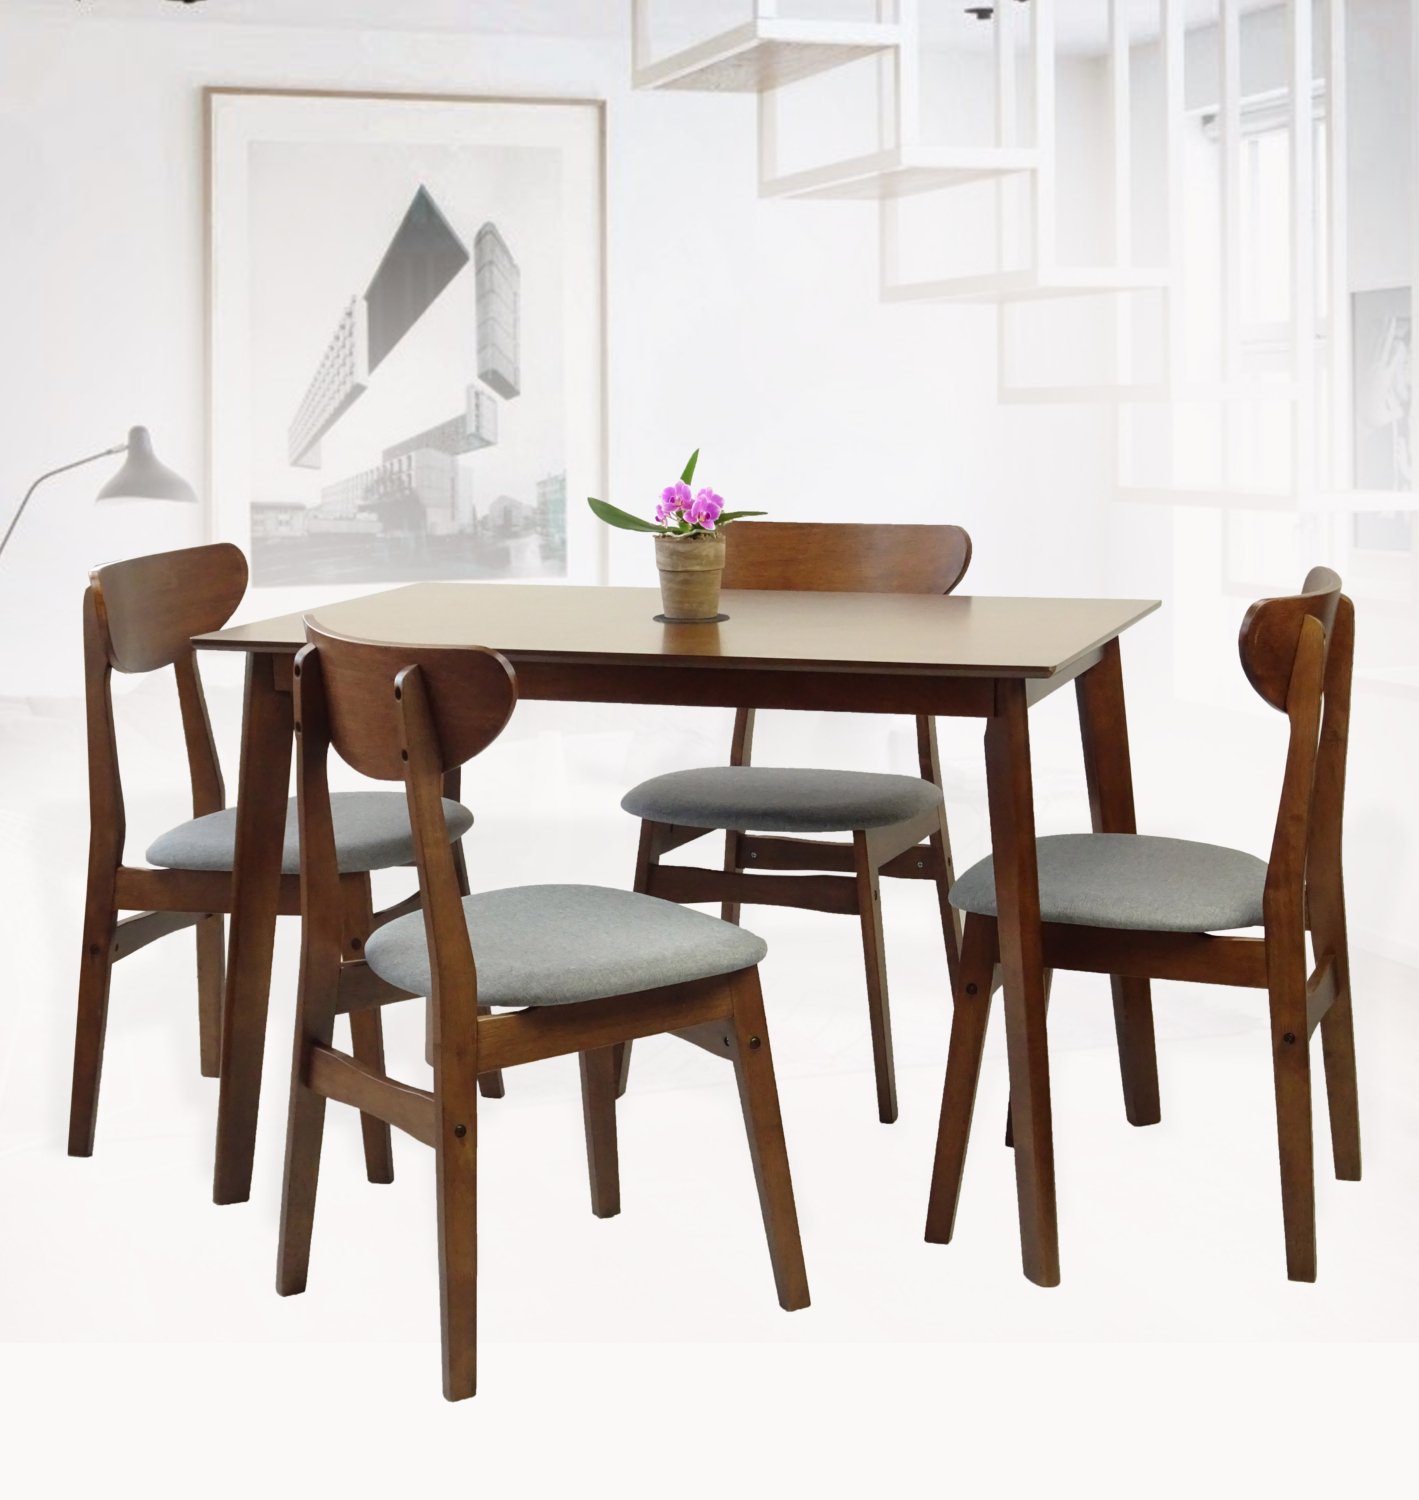 Dining Room Set of 4 Yumiko Chairs and Rectangular Table